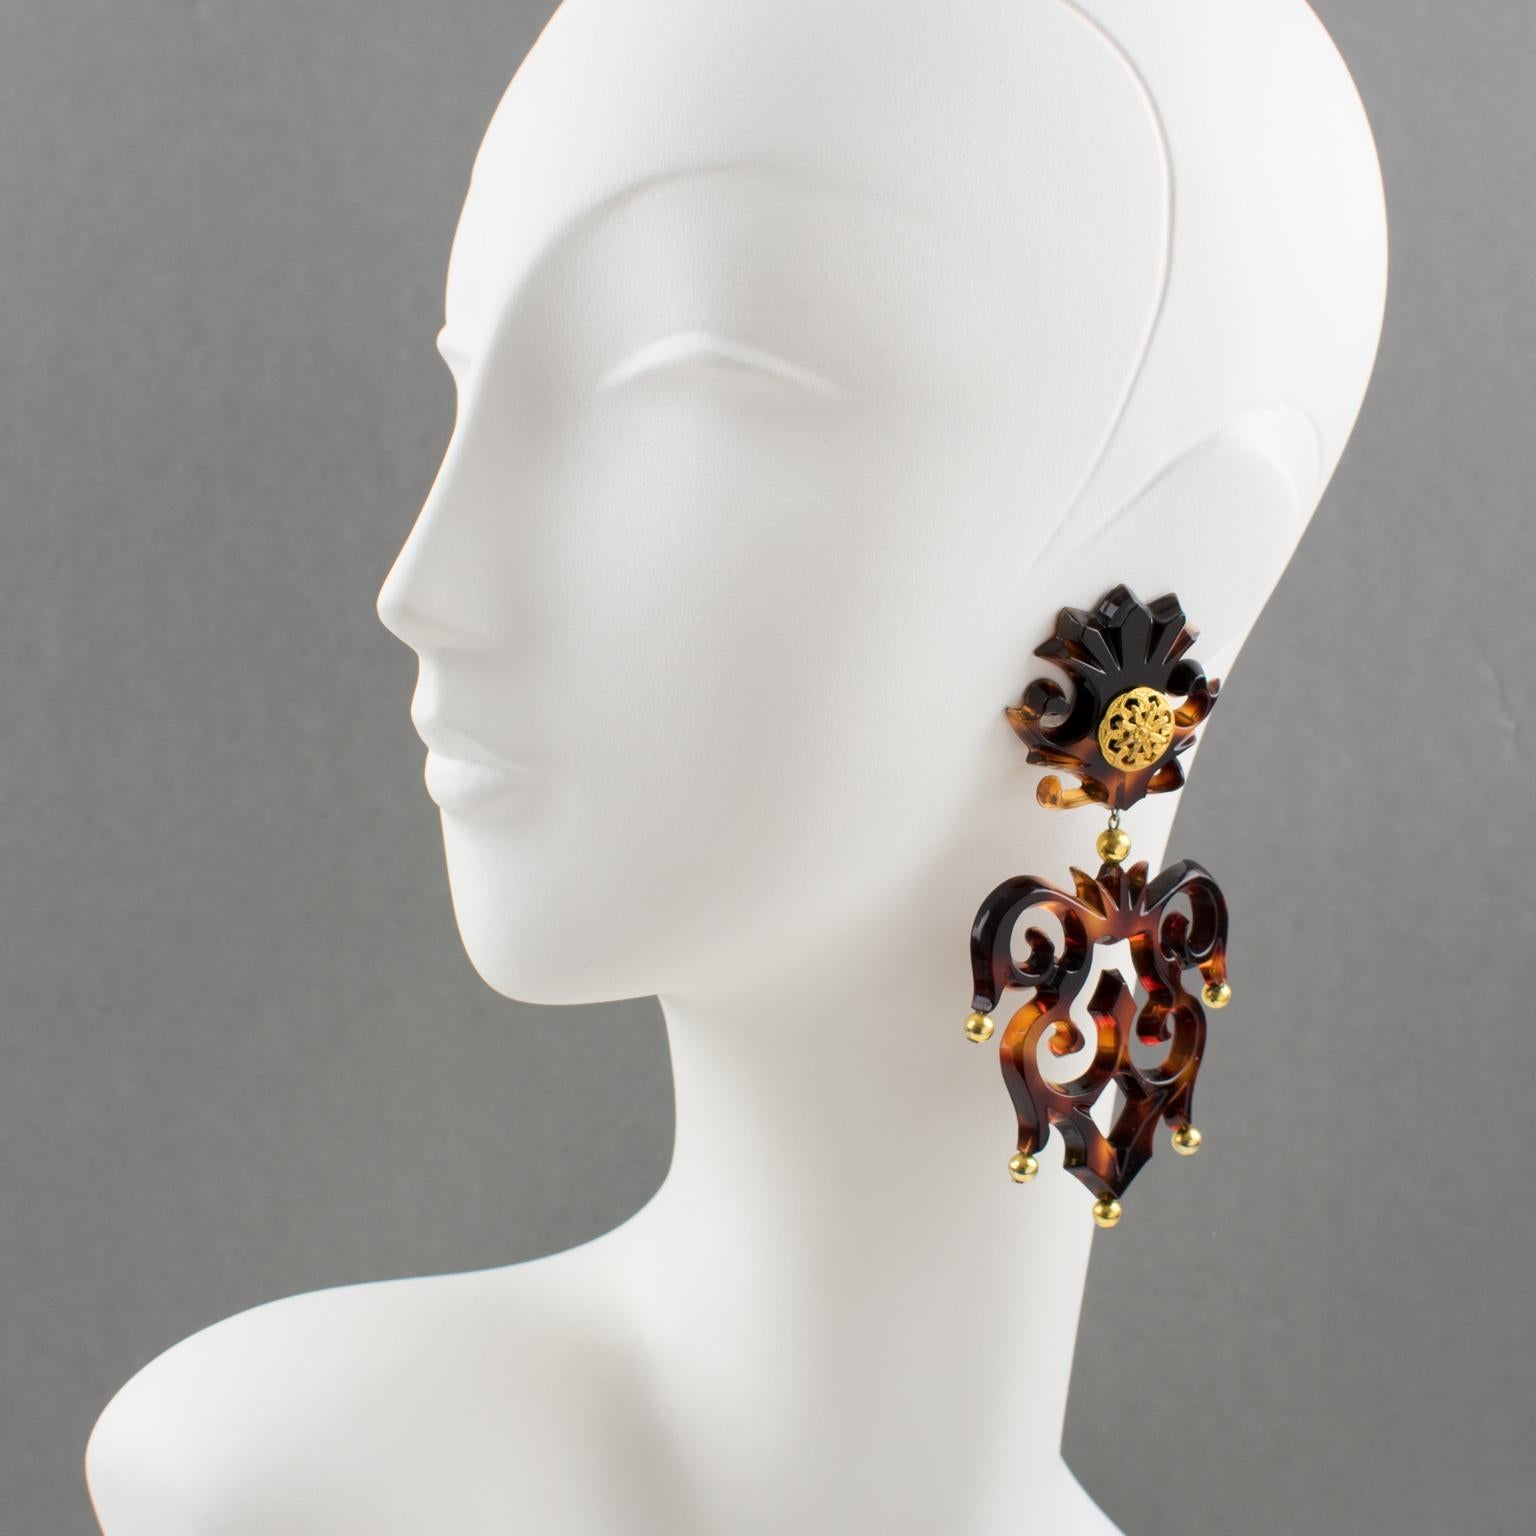 Isabel Canovas Paris designed these outstanding resin or Lucite clip-on earrings. The massive dangling chandelier shape boasts a baroque carving and see-thru in tortoiseshell color complemented with gilt metal beads and ornament. The pieces are